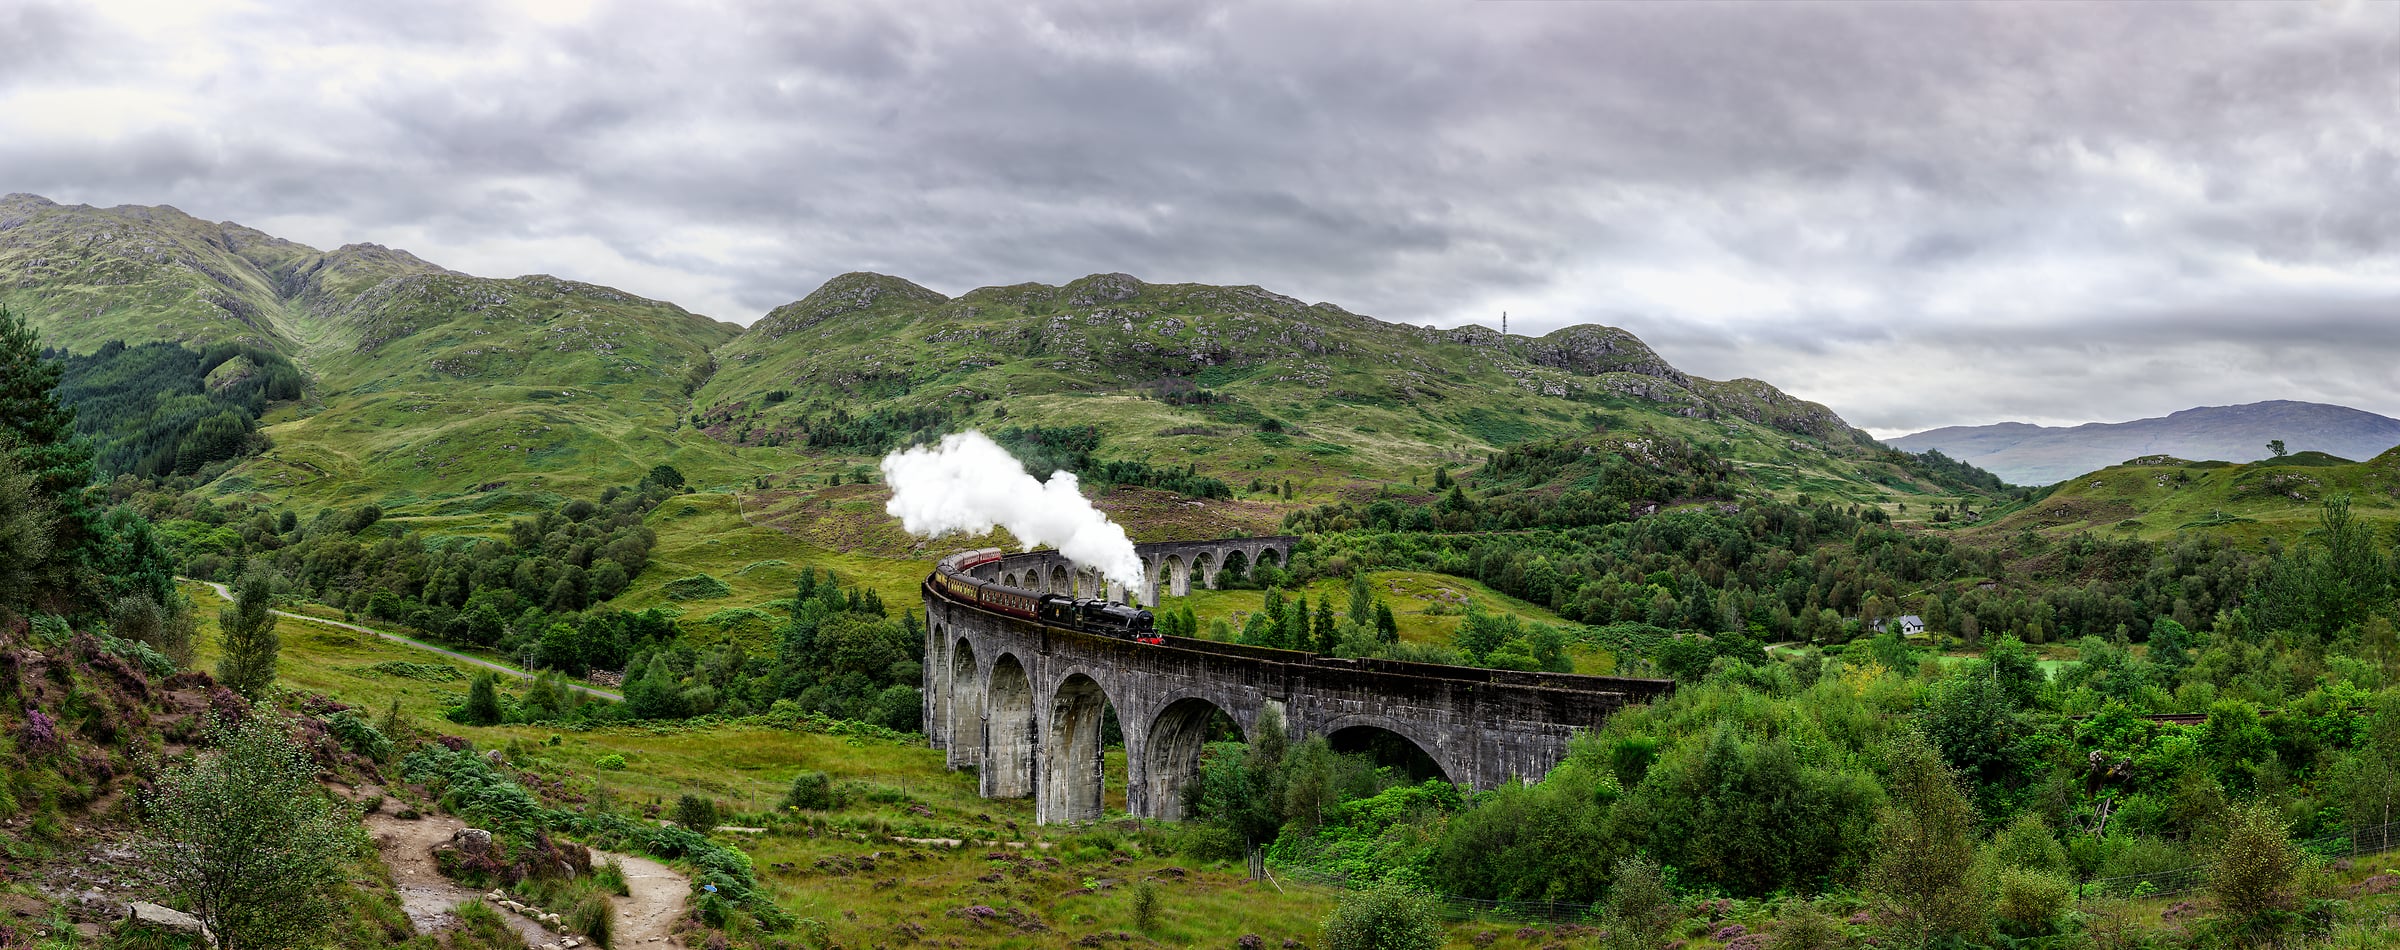 2,691 megapixels! A very high resolution, large-format VAST photo print of the Jacobite railroad train steam locomotive going across the Glenfinnan Viaduct bridge; landscape wall mural photograph created by Scott Dimond in Glenfinnan Viaduct, United Kingdom